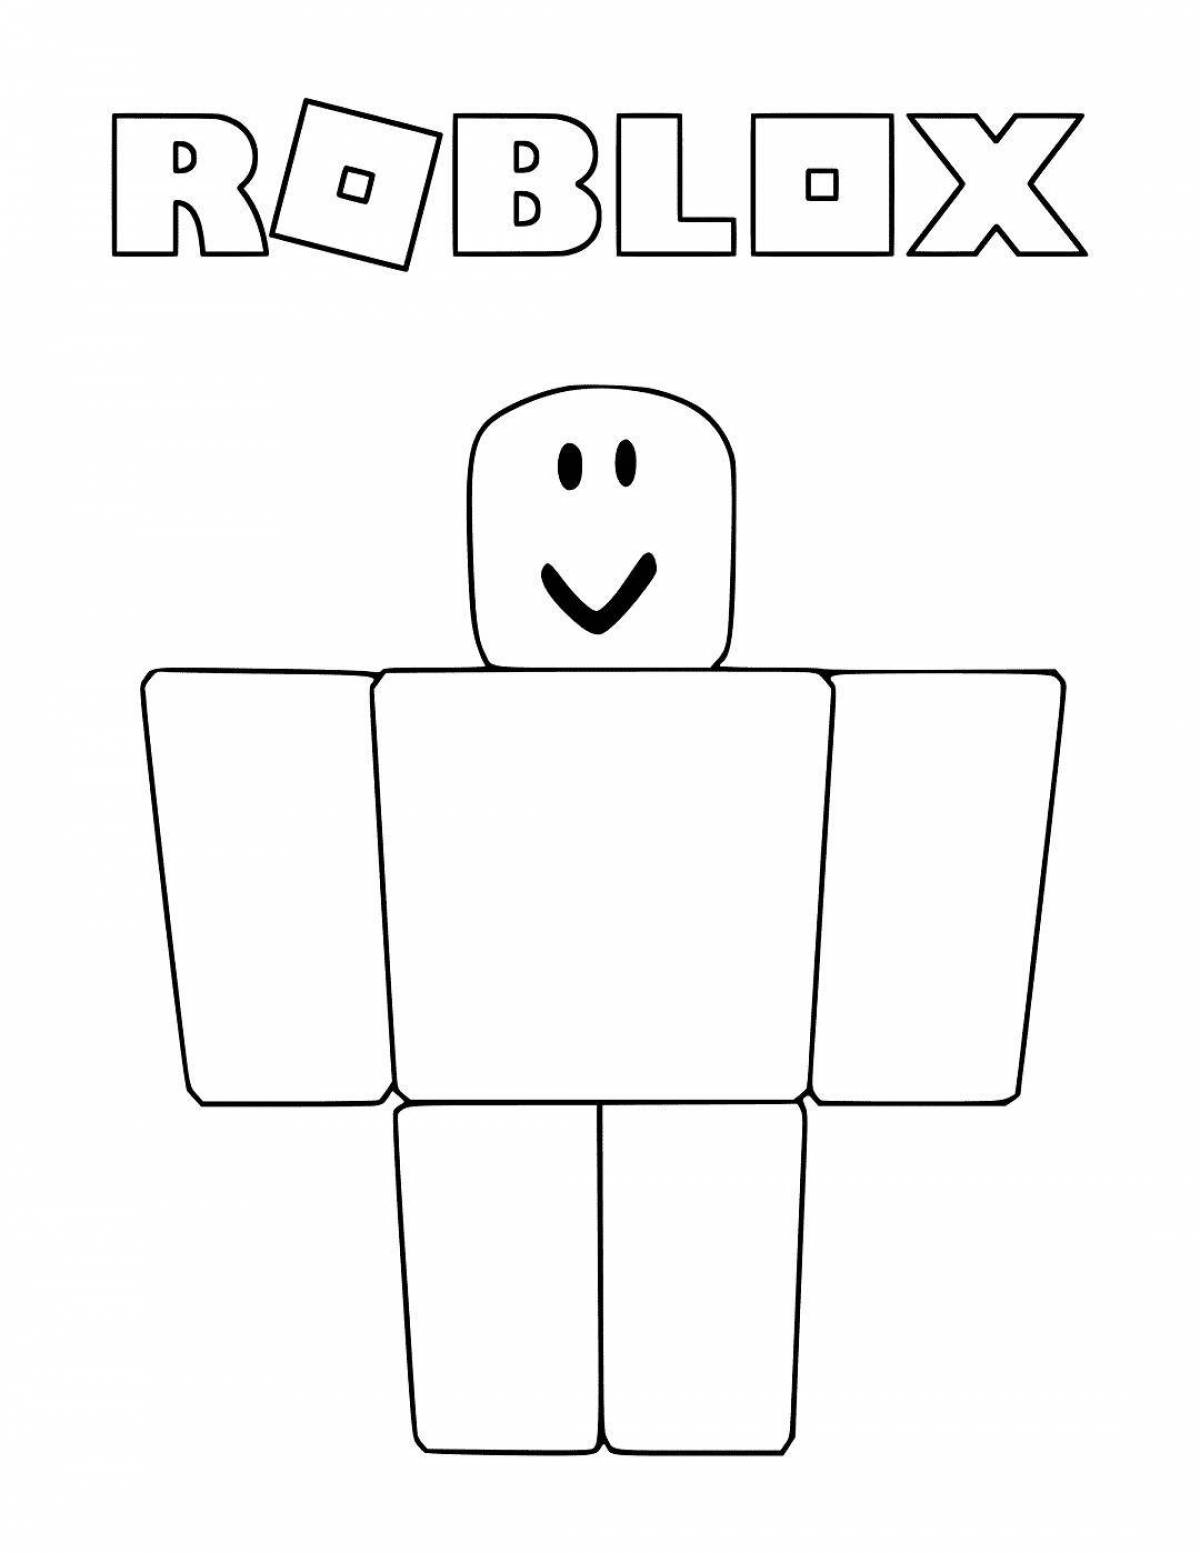 Colorful roblox kp coloring page